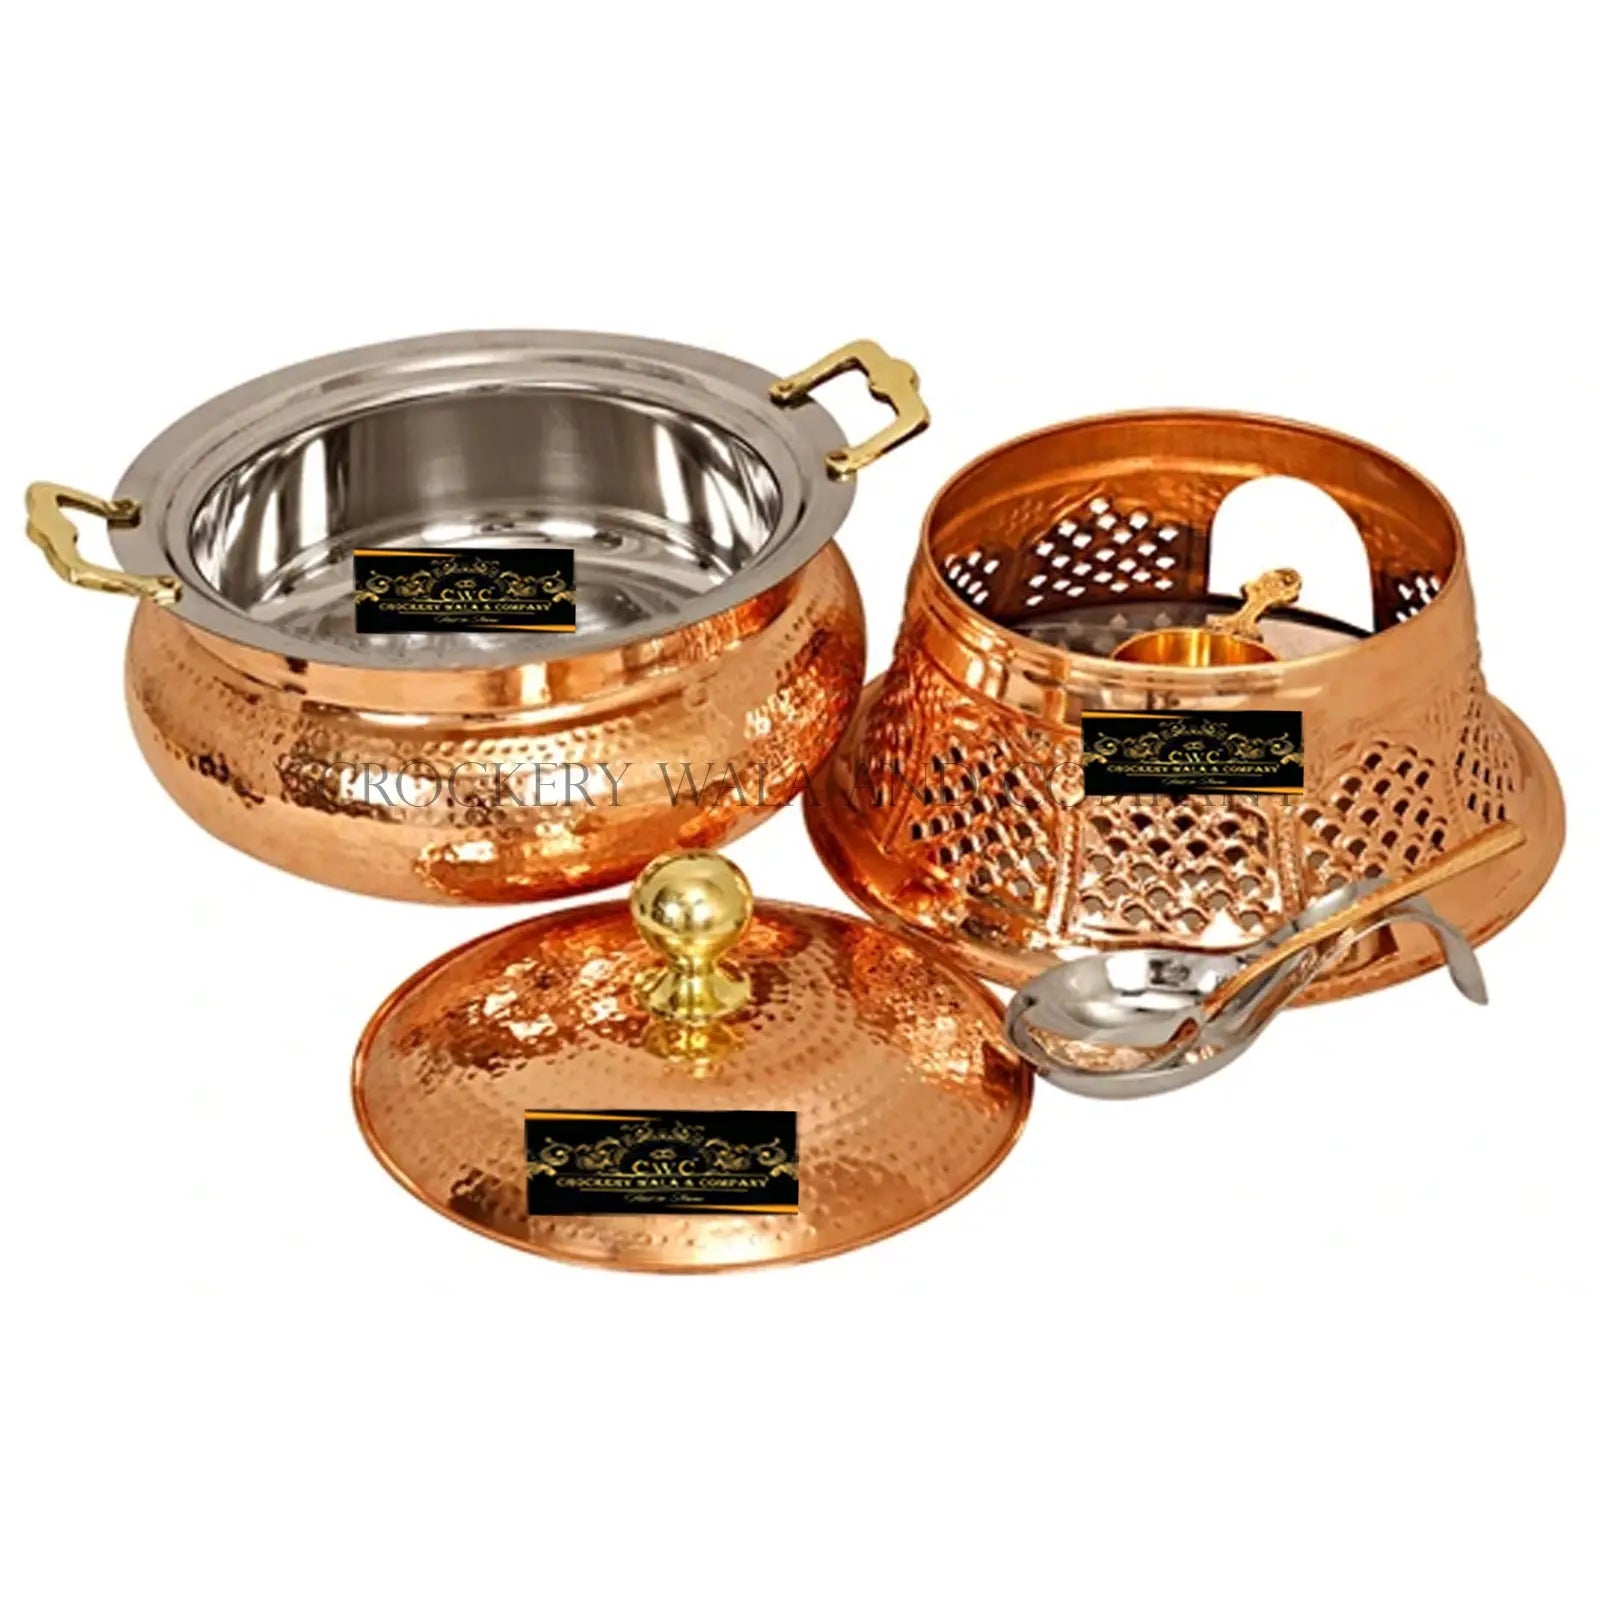 Crockery Wala And Company Copper Steel Chaffing Dish Hammered Design Chaffing Dish With Stand And Spoon 6 Liters - CROCKERY WALA AND COMPANY 